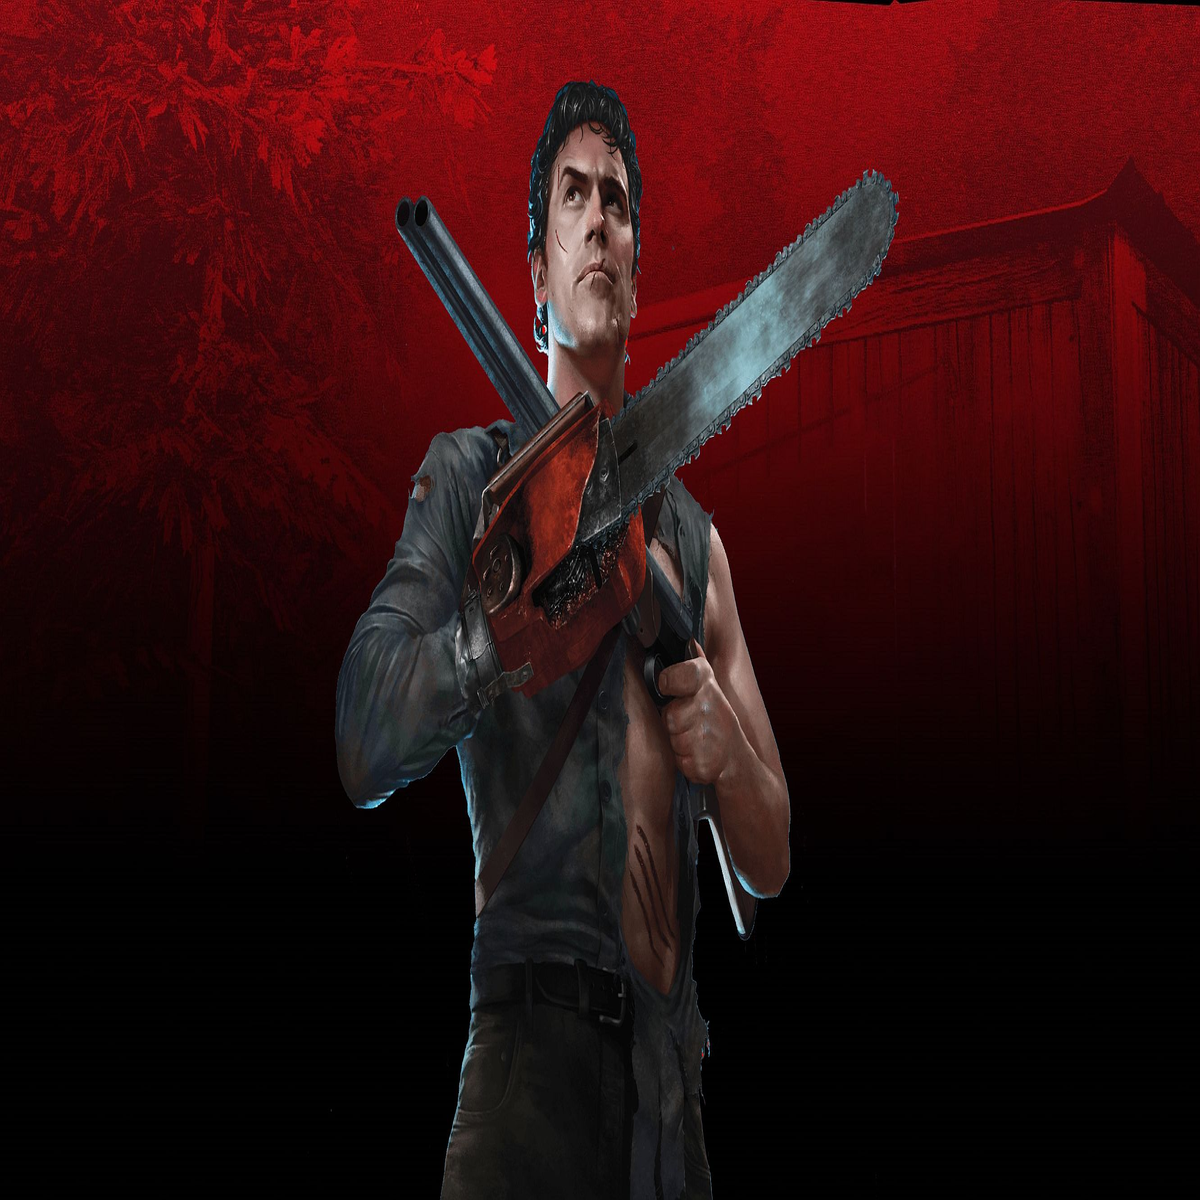 Evil Dead: The Game' - News About the Next DLC Update Coming Soon